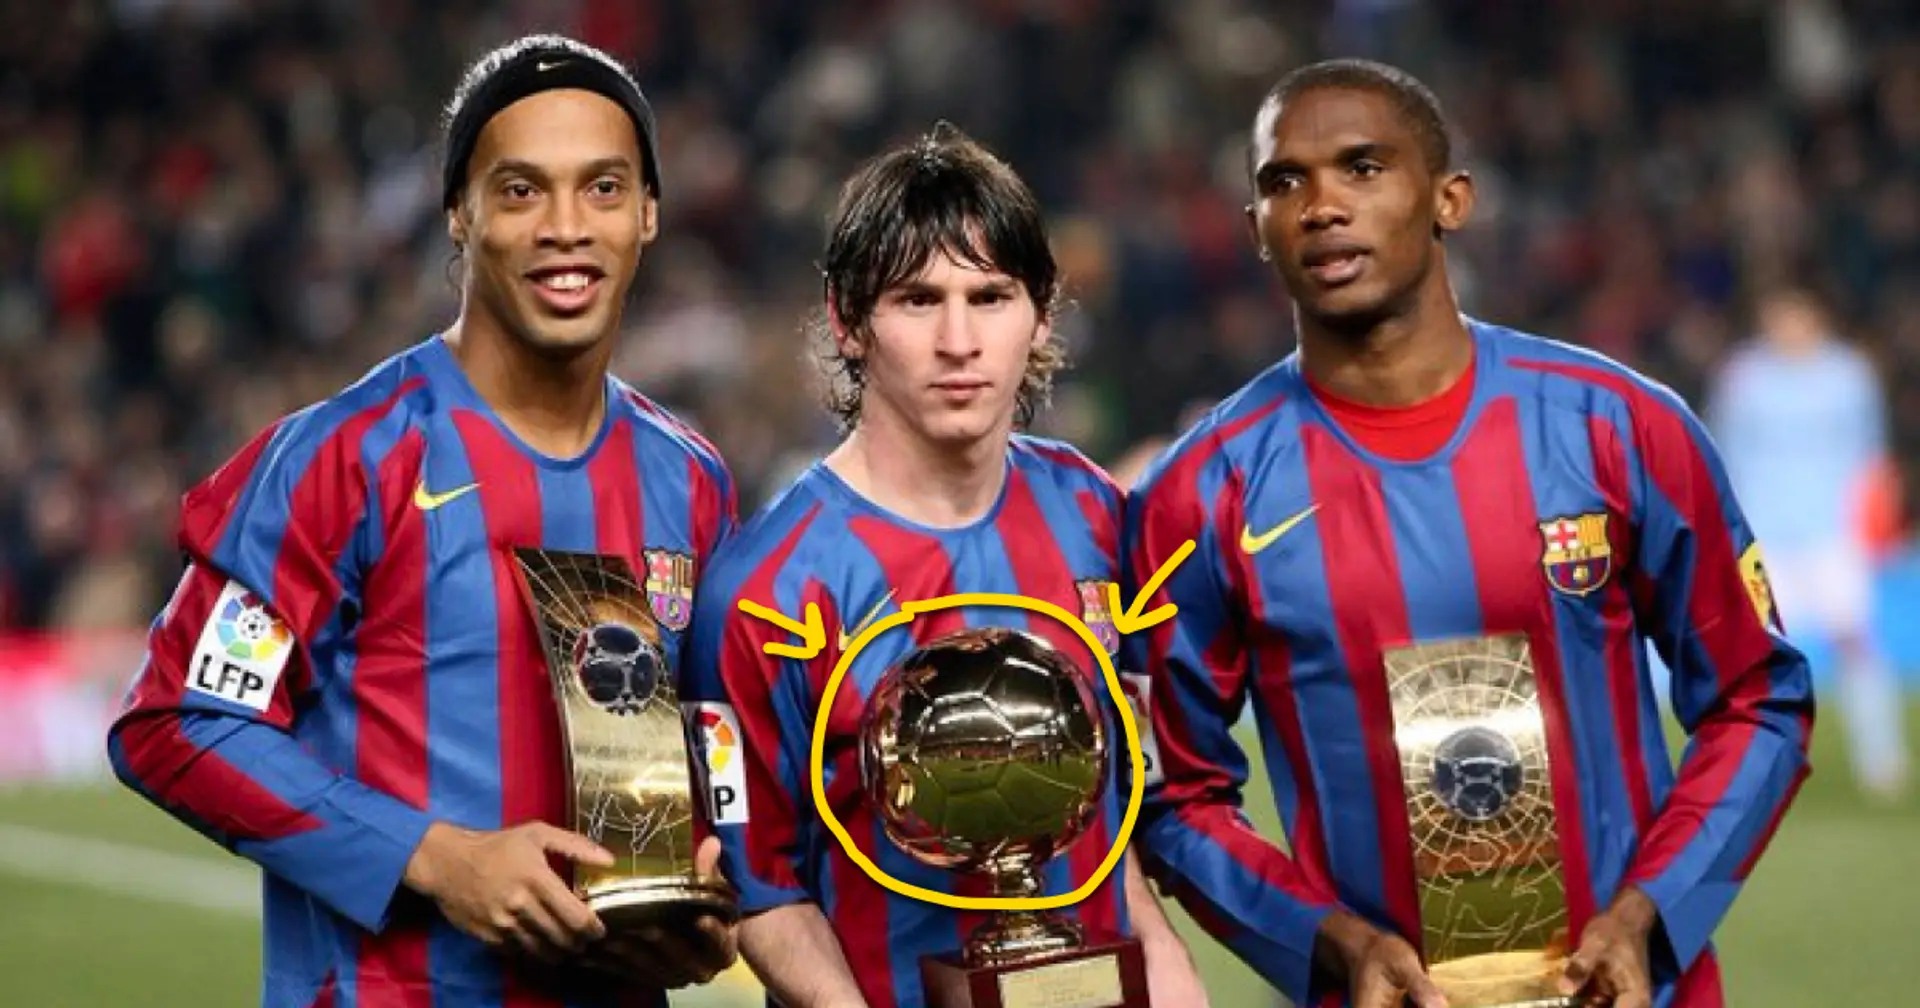 Why does no.30 Leo Messi hold golden ball in this old photo if he wouldn't win Ballon d'Or until 2009? Explained 